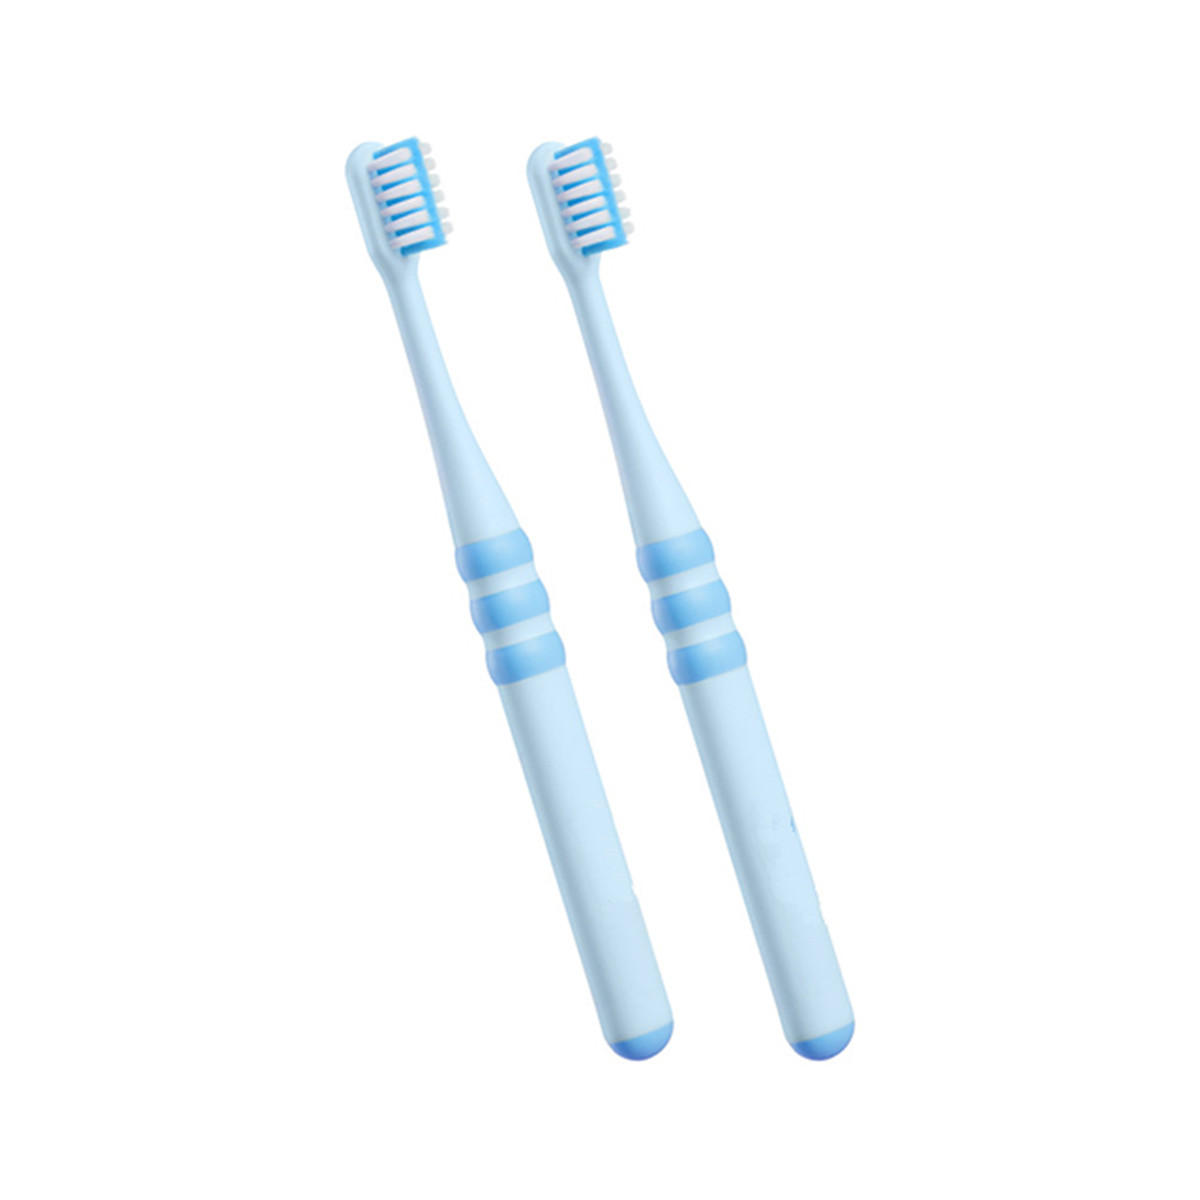 

2Pcs Dr. Bet Cute Toothbrush Two Color Options Protect Children's Oral Cavity Manual Toothbrush from Xiaomi Youpin